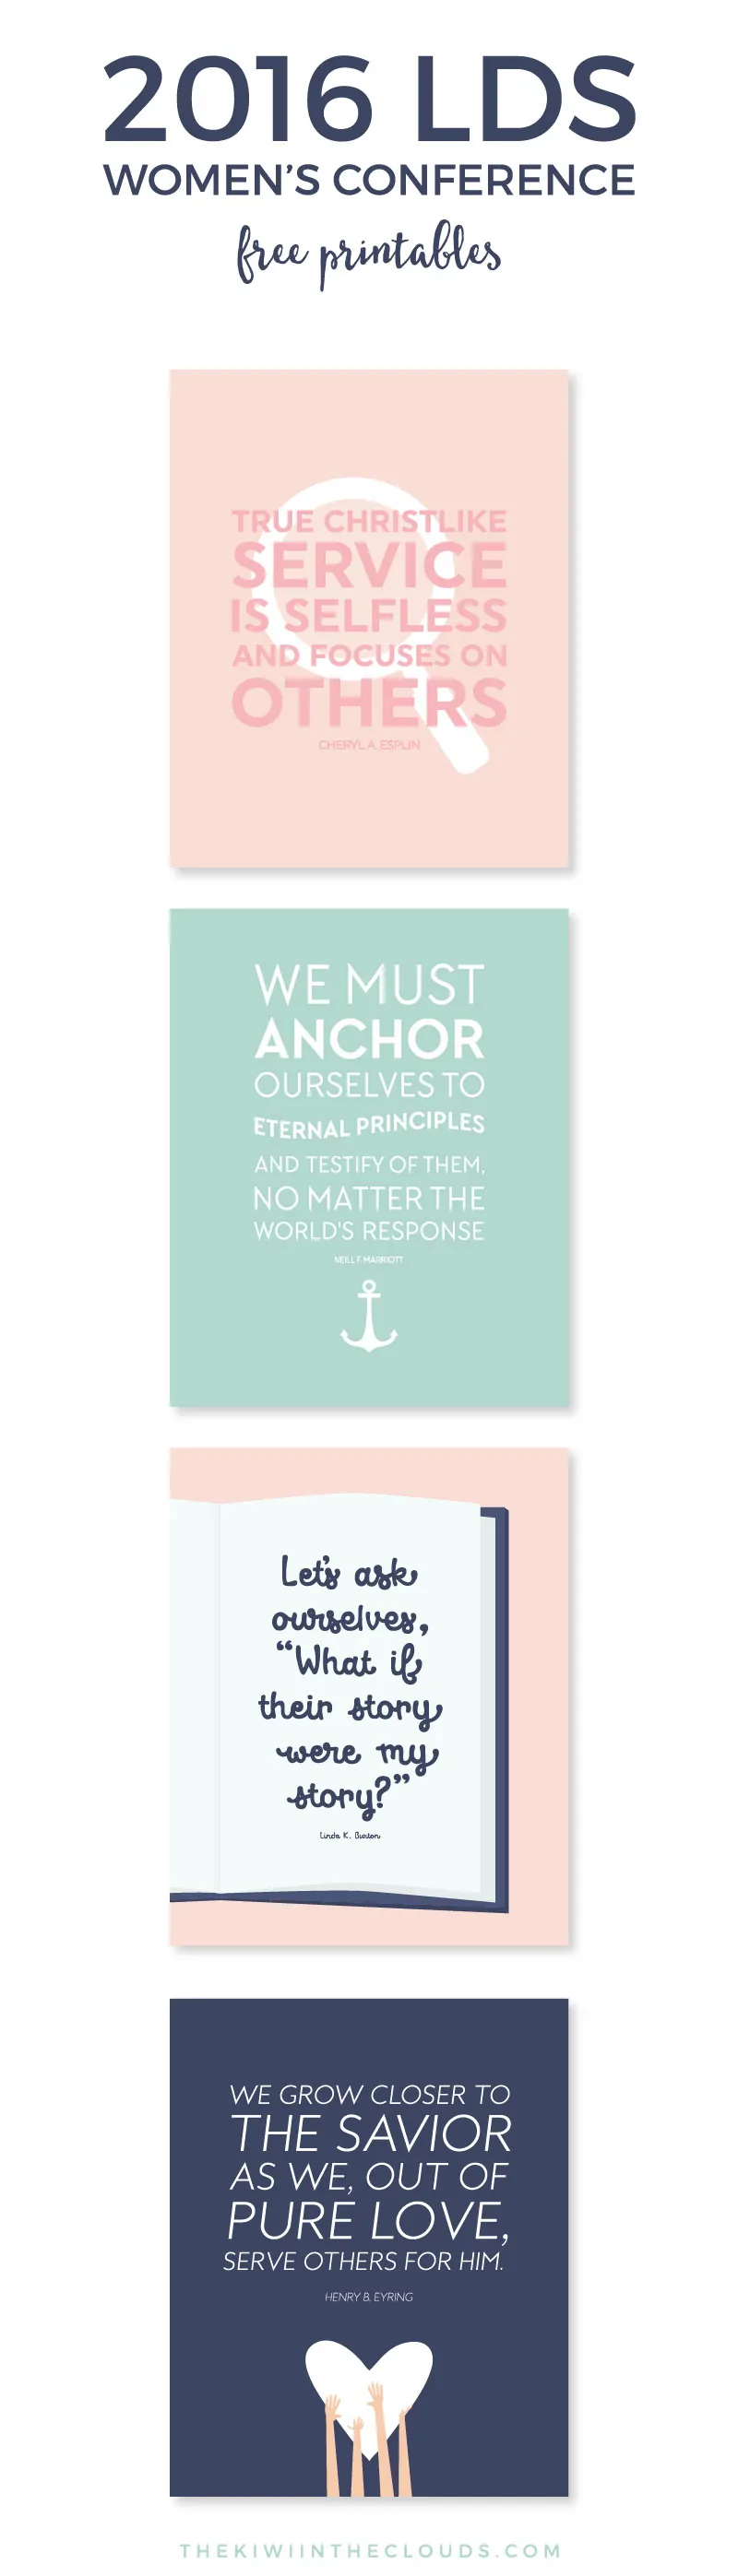 These LDS Womens Conference 2016 FREE printables are the perfect way to add inspiring and uplifting art to your home in an instant! They also make great visiting teaching handouts as well. Come by and download these today!